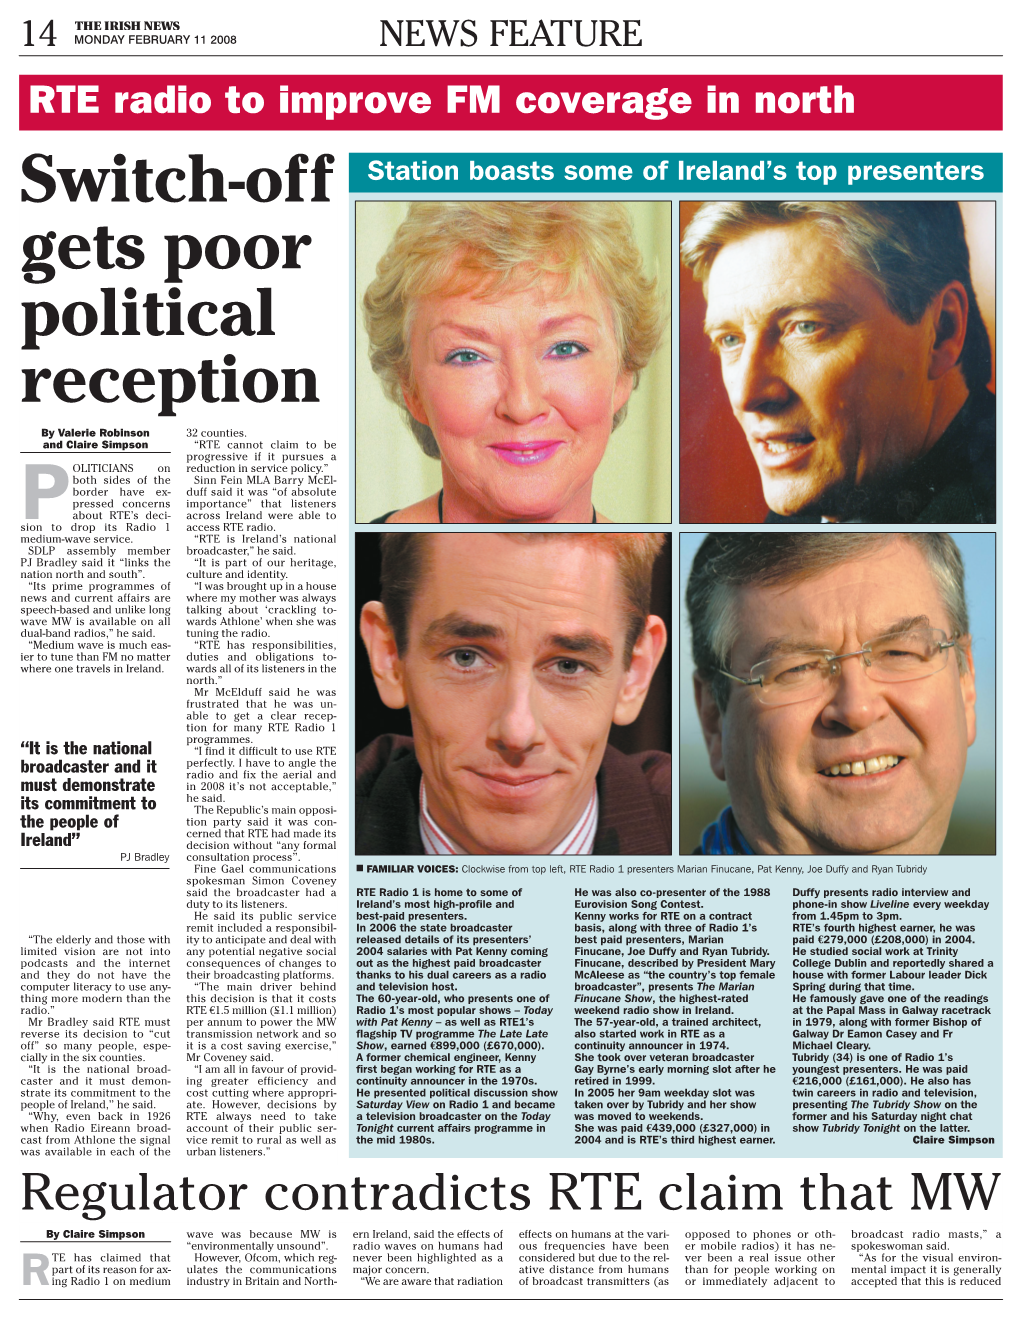 Switch-Off Gets Poor Political Reception